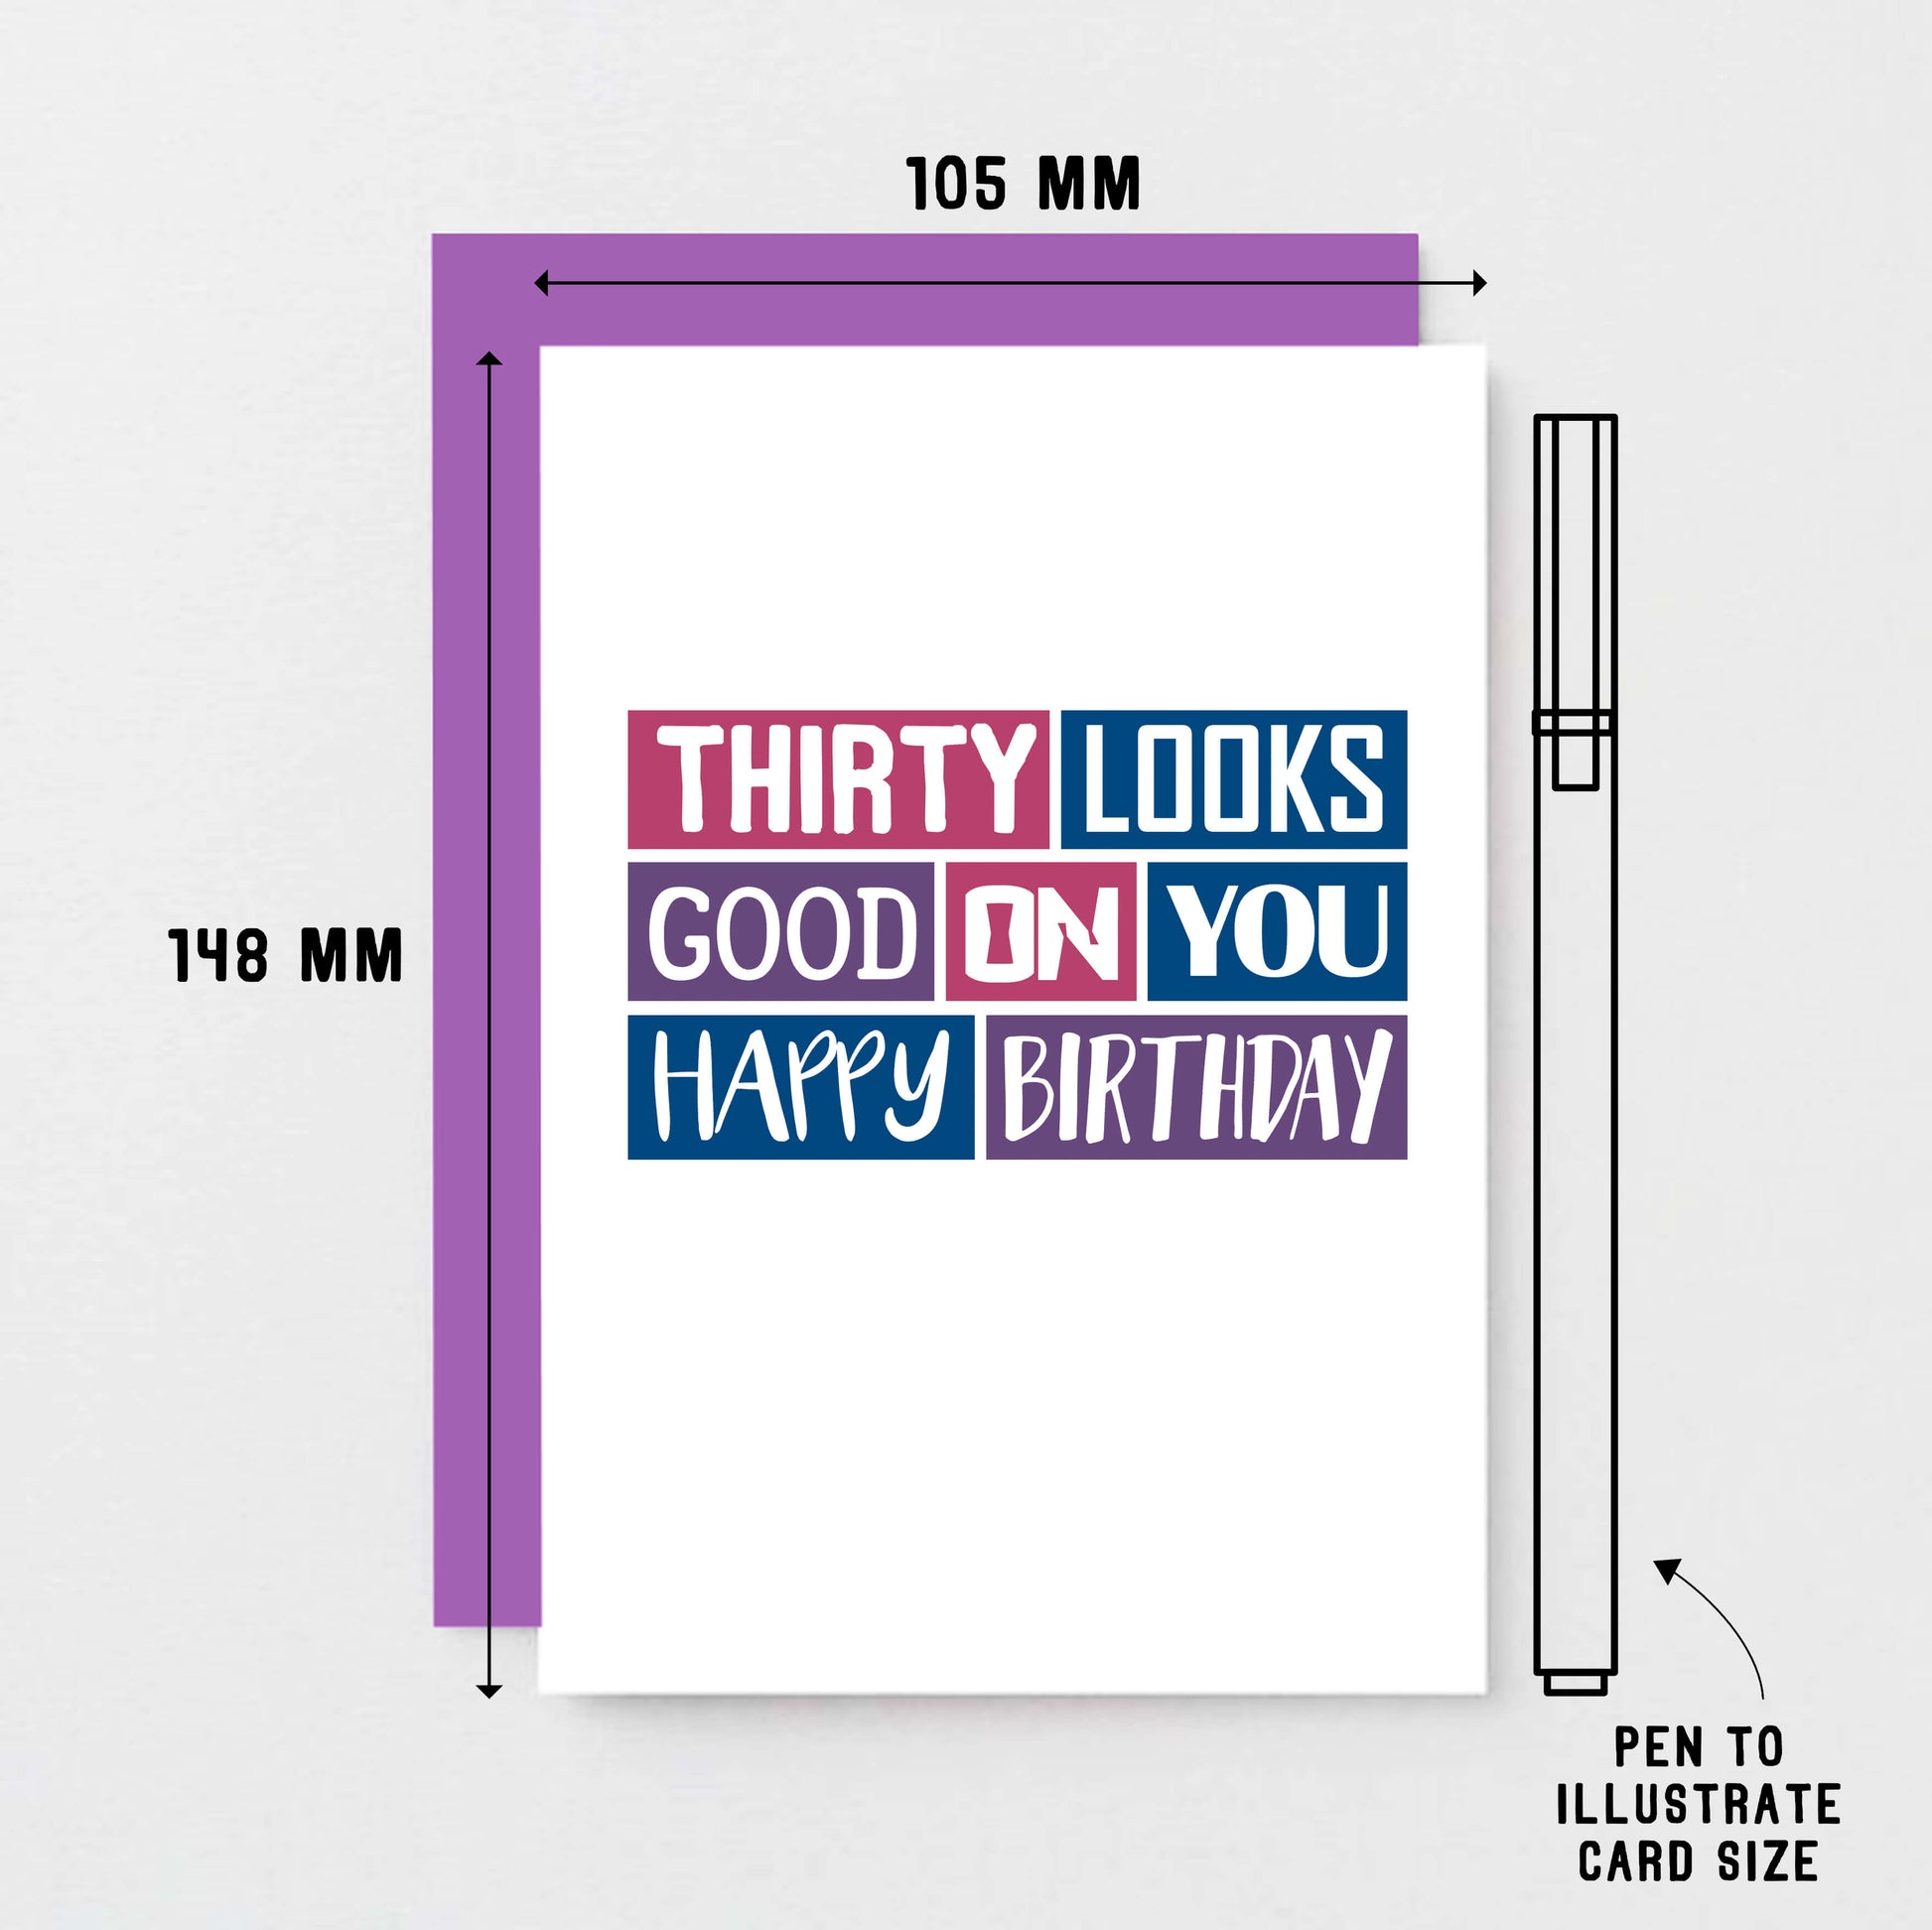 30th Birthday Card by SixElevenCreations. Reads Thirty looks good on you. Happy birthday. Product Code SE0226A6